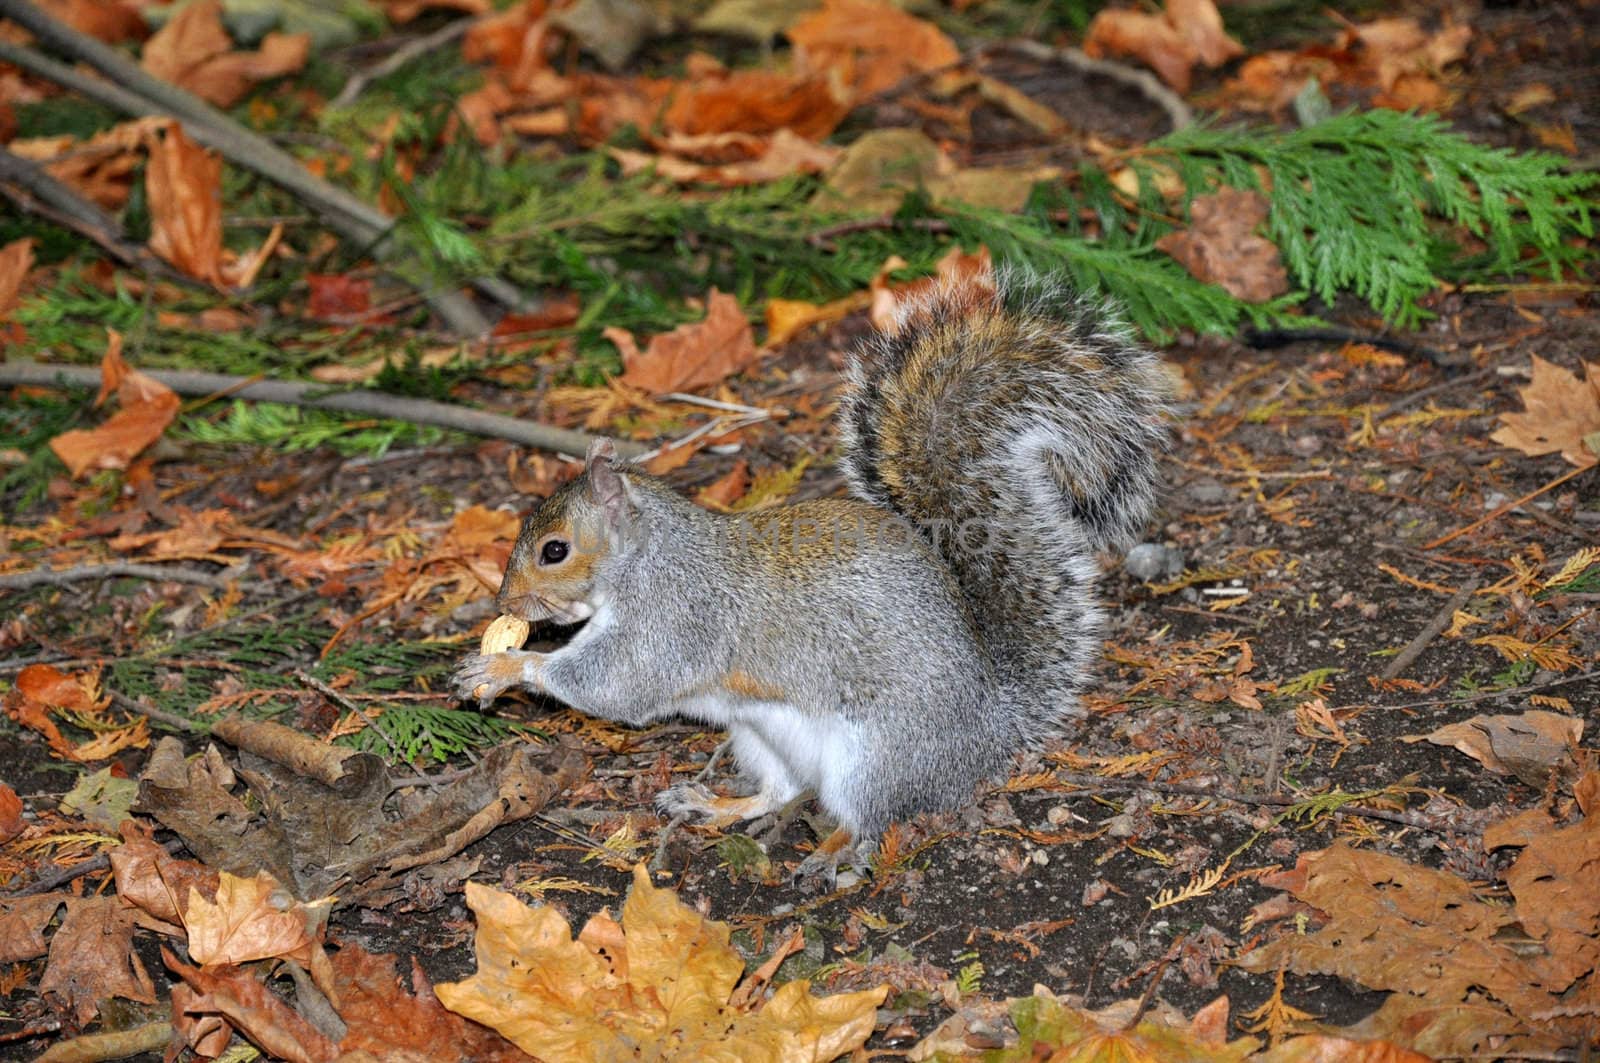 Squirrel standing and eating a nut  by lobzik